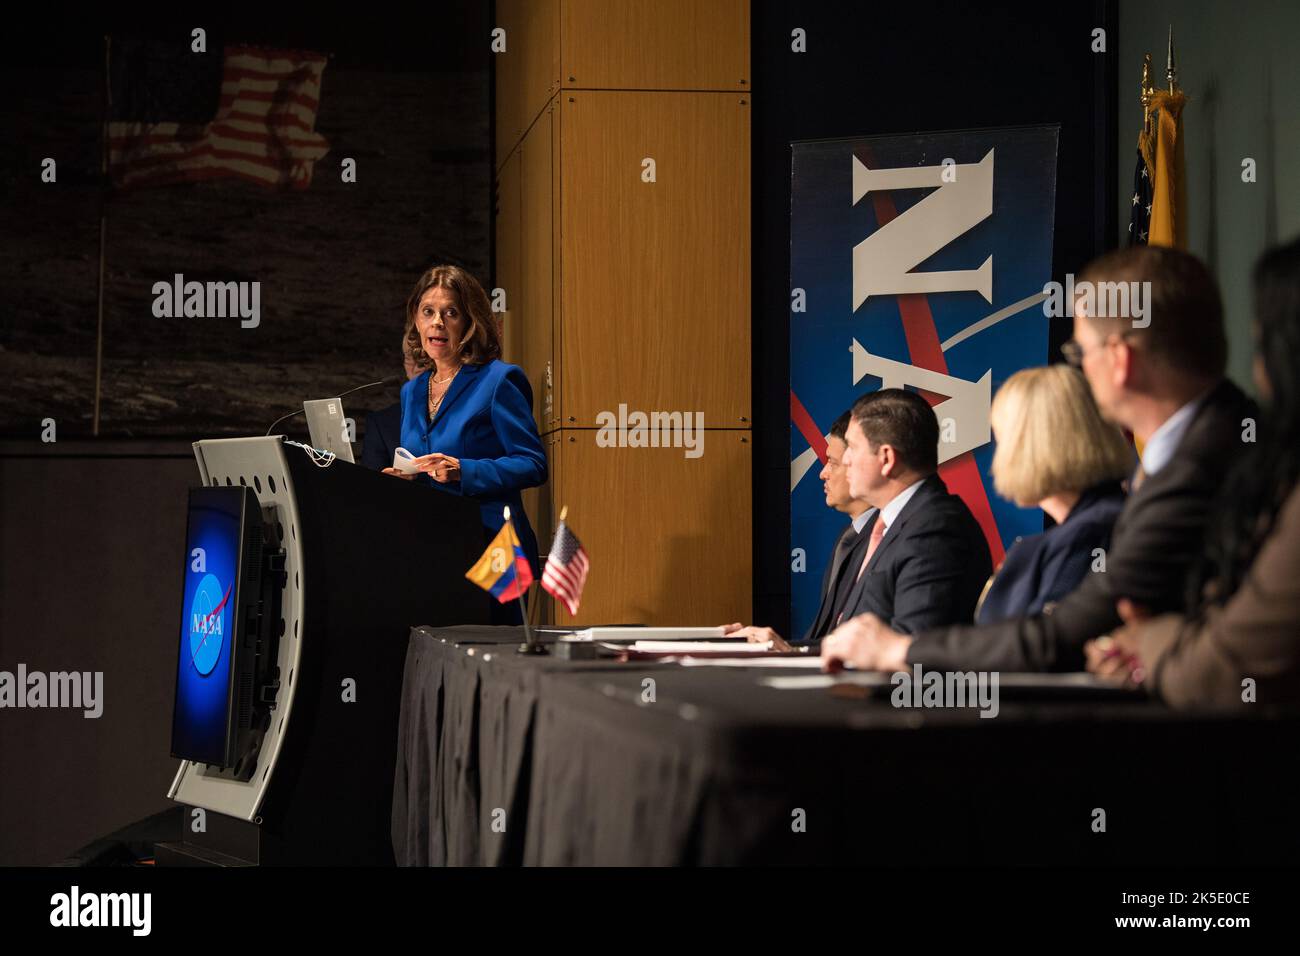 Colombian Vice President and Foreign Minister, Marta Lucía Ramírez, speaks before signing the Artemis Accords, Tuesday, May 10, 2022, at NASA Headquarters in Washington DC. Colombia is the nineteenth country to sign the Artemis Accords, which establish a practical set of principles to guide space exploration cooperation among nations participating in NASA’s Artemis program. Stock Photo